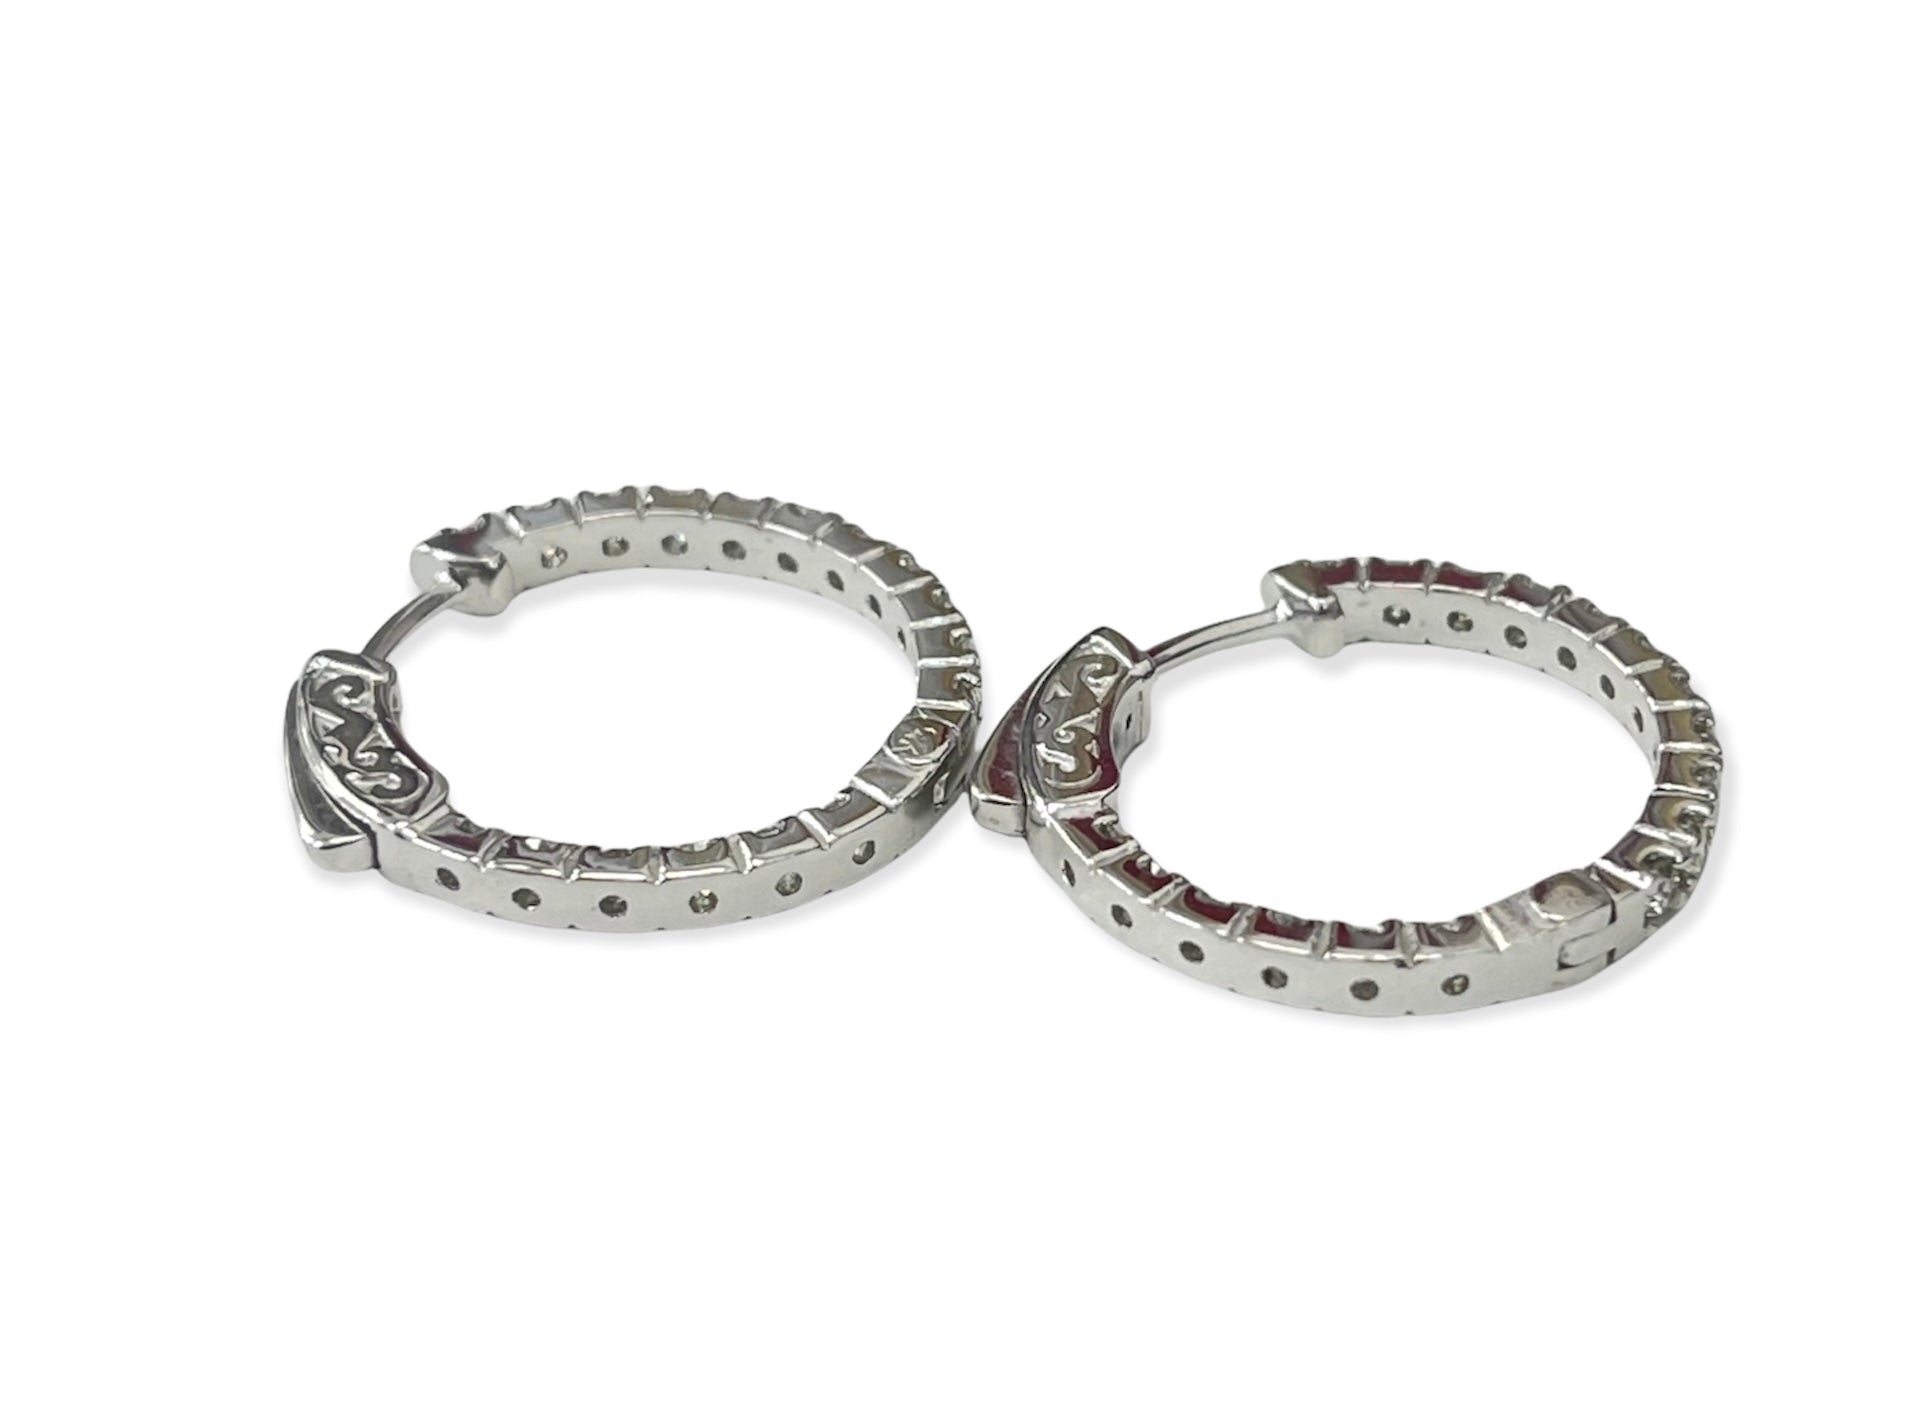 Diamond Hoop Earrings In and Out Round Brilliants Diamond White Gold